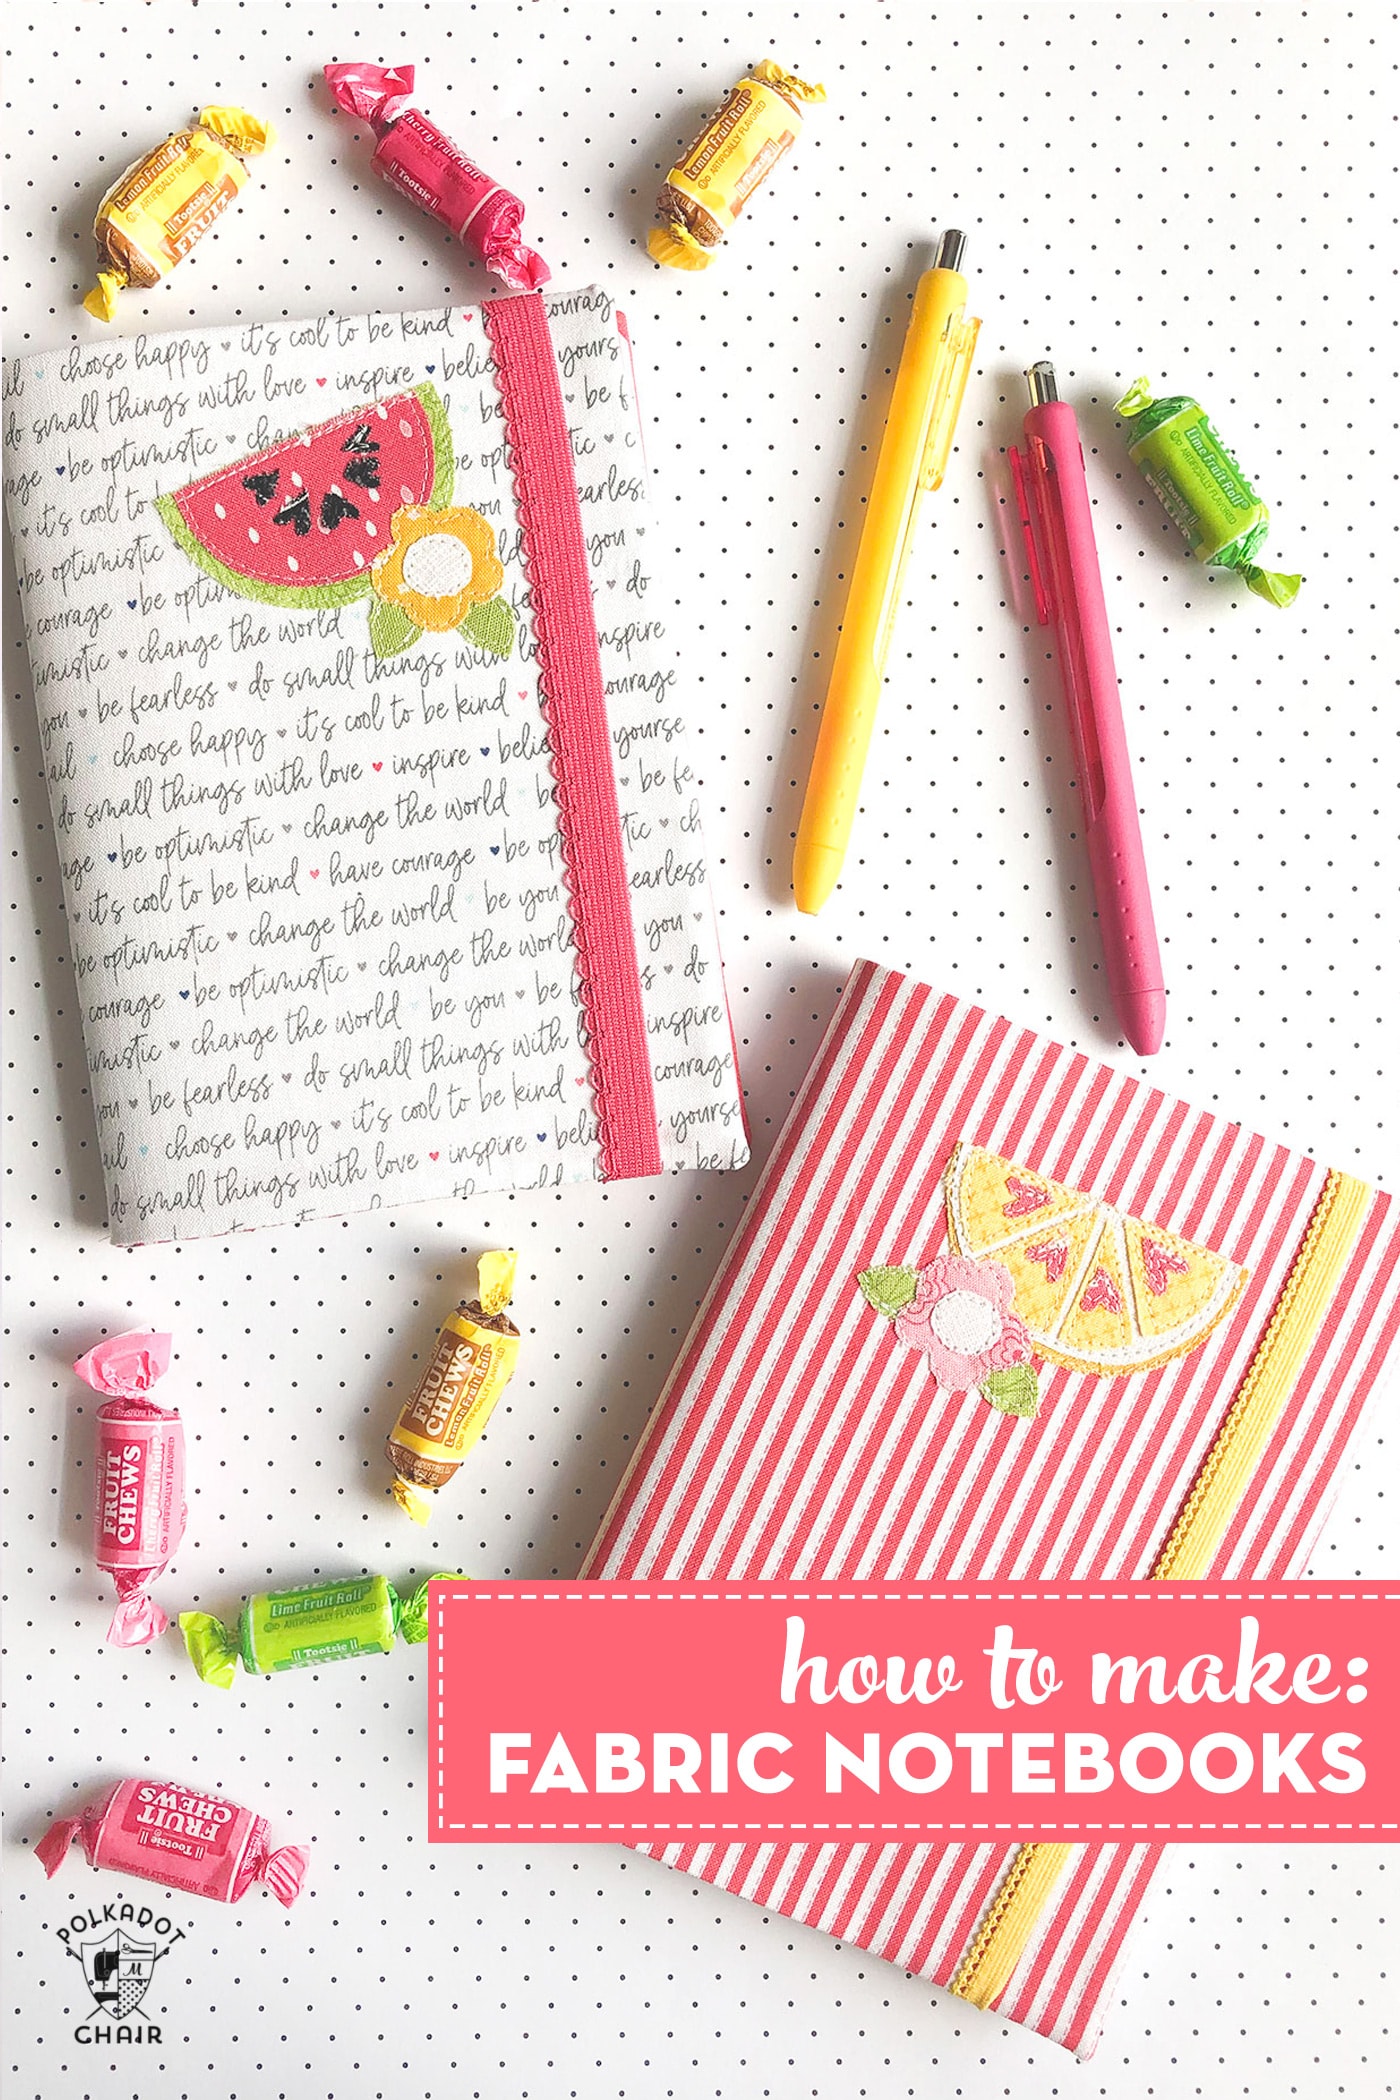 How to Make a Fabric Covered Notebook with Applique Details